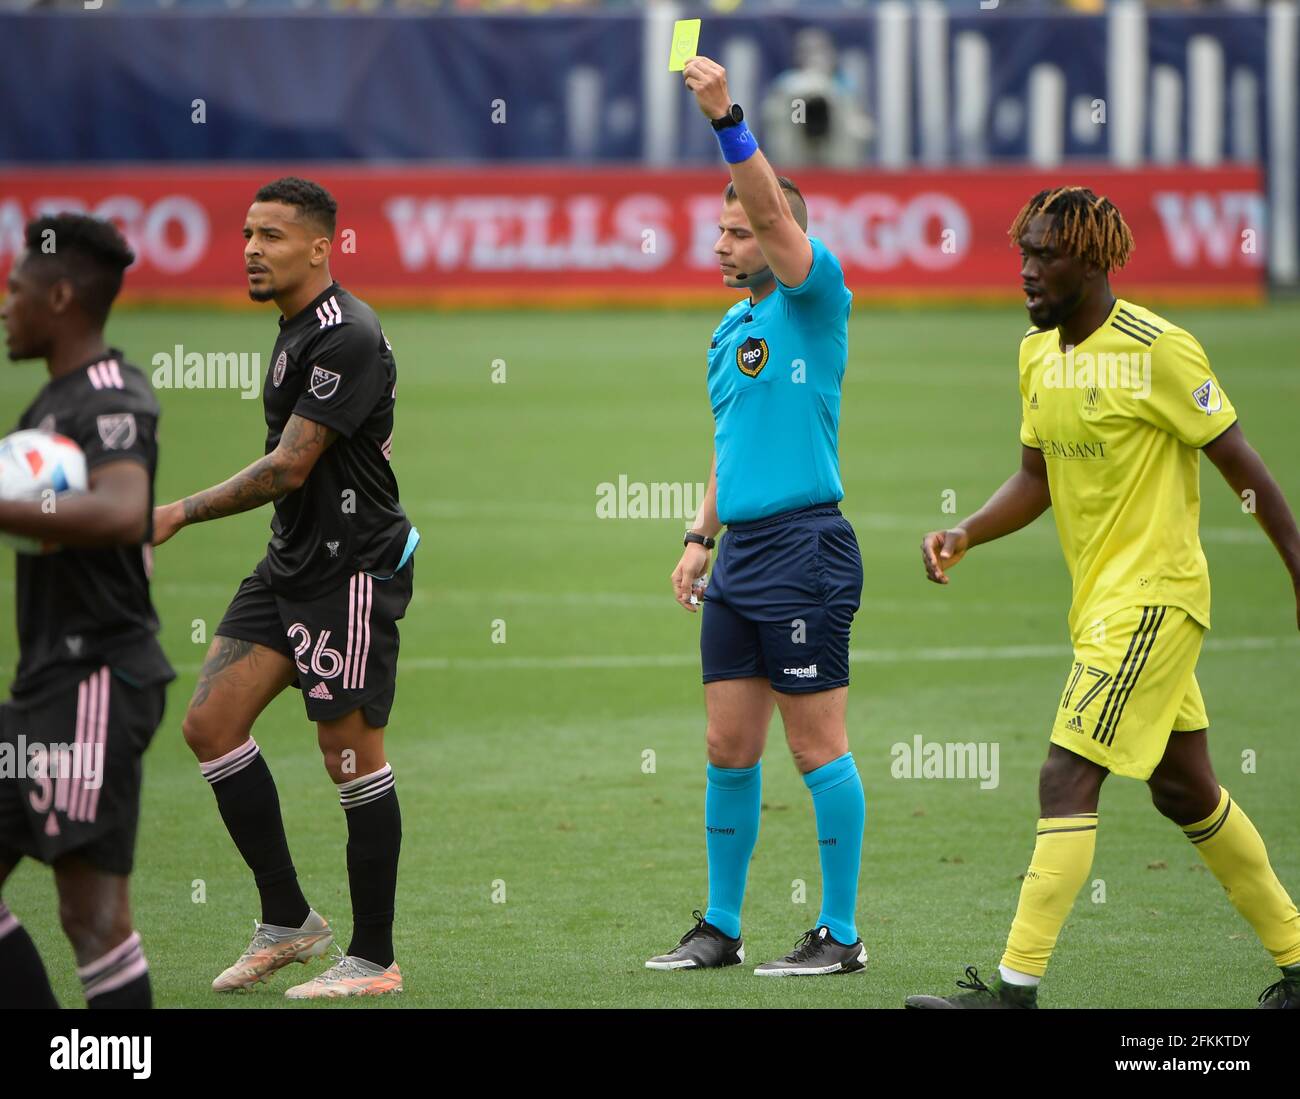 May 2, 2021: Inter Miami CF midfielder Gregore (26) is issued a yellow card against the Nashville SC during the second half of an MLS game between the Inter Miami CF and the Nashville SC at Nissan Stadium in Nashville TN (Mandatory Photo Credit: Steve Roberts/CSM) Stock Photo